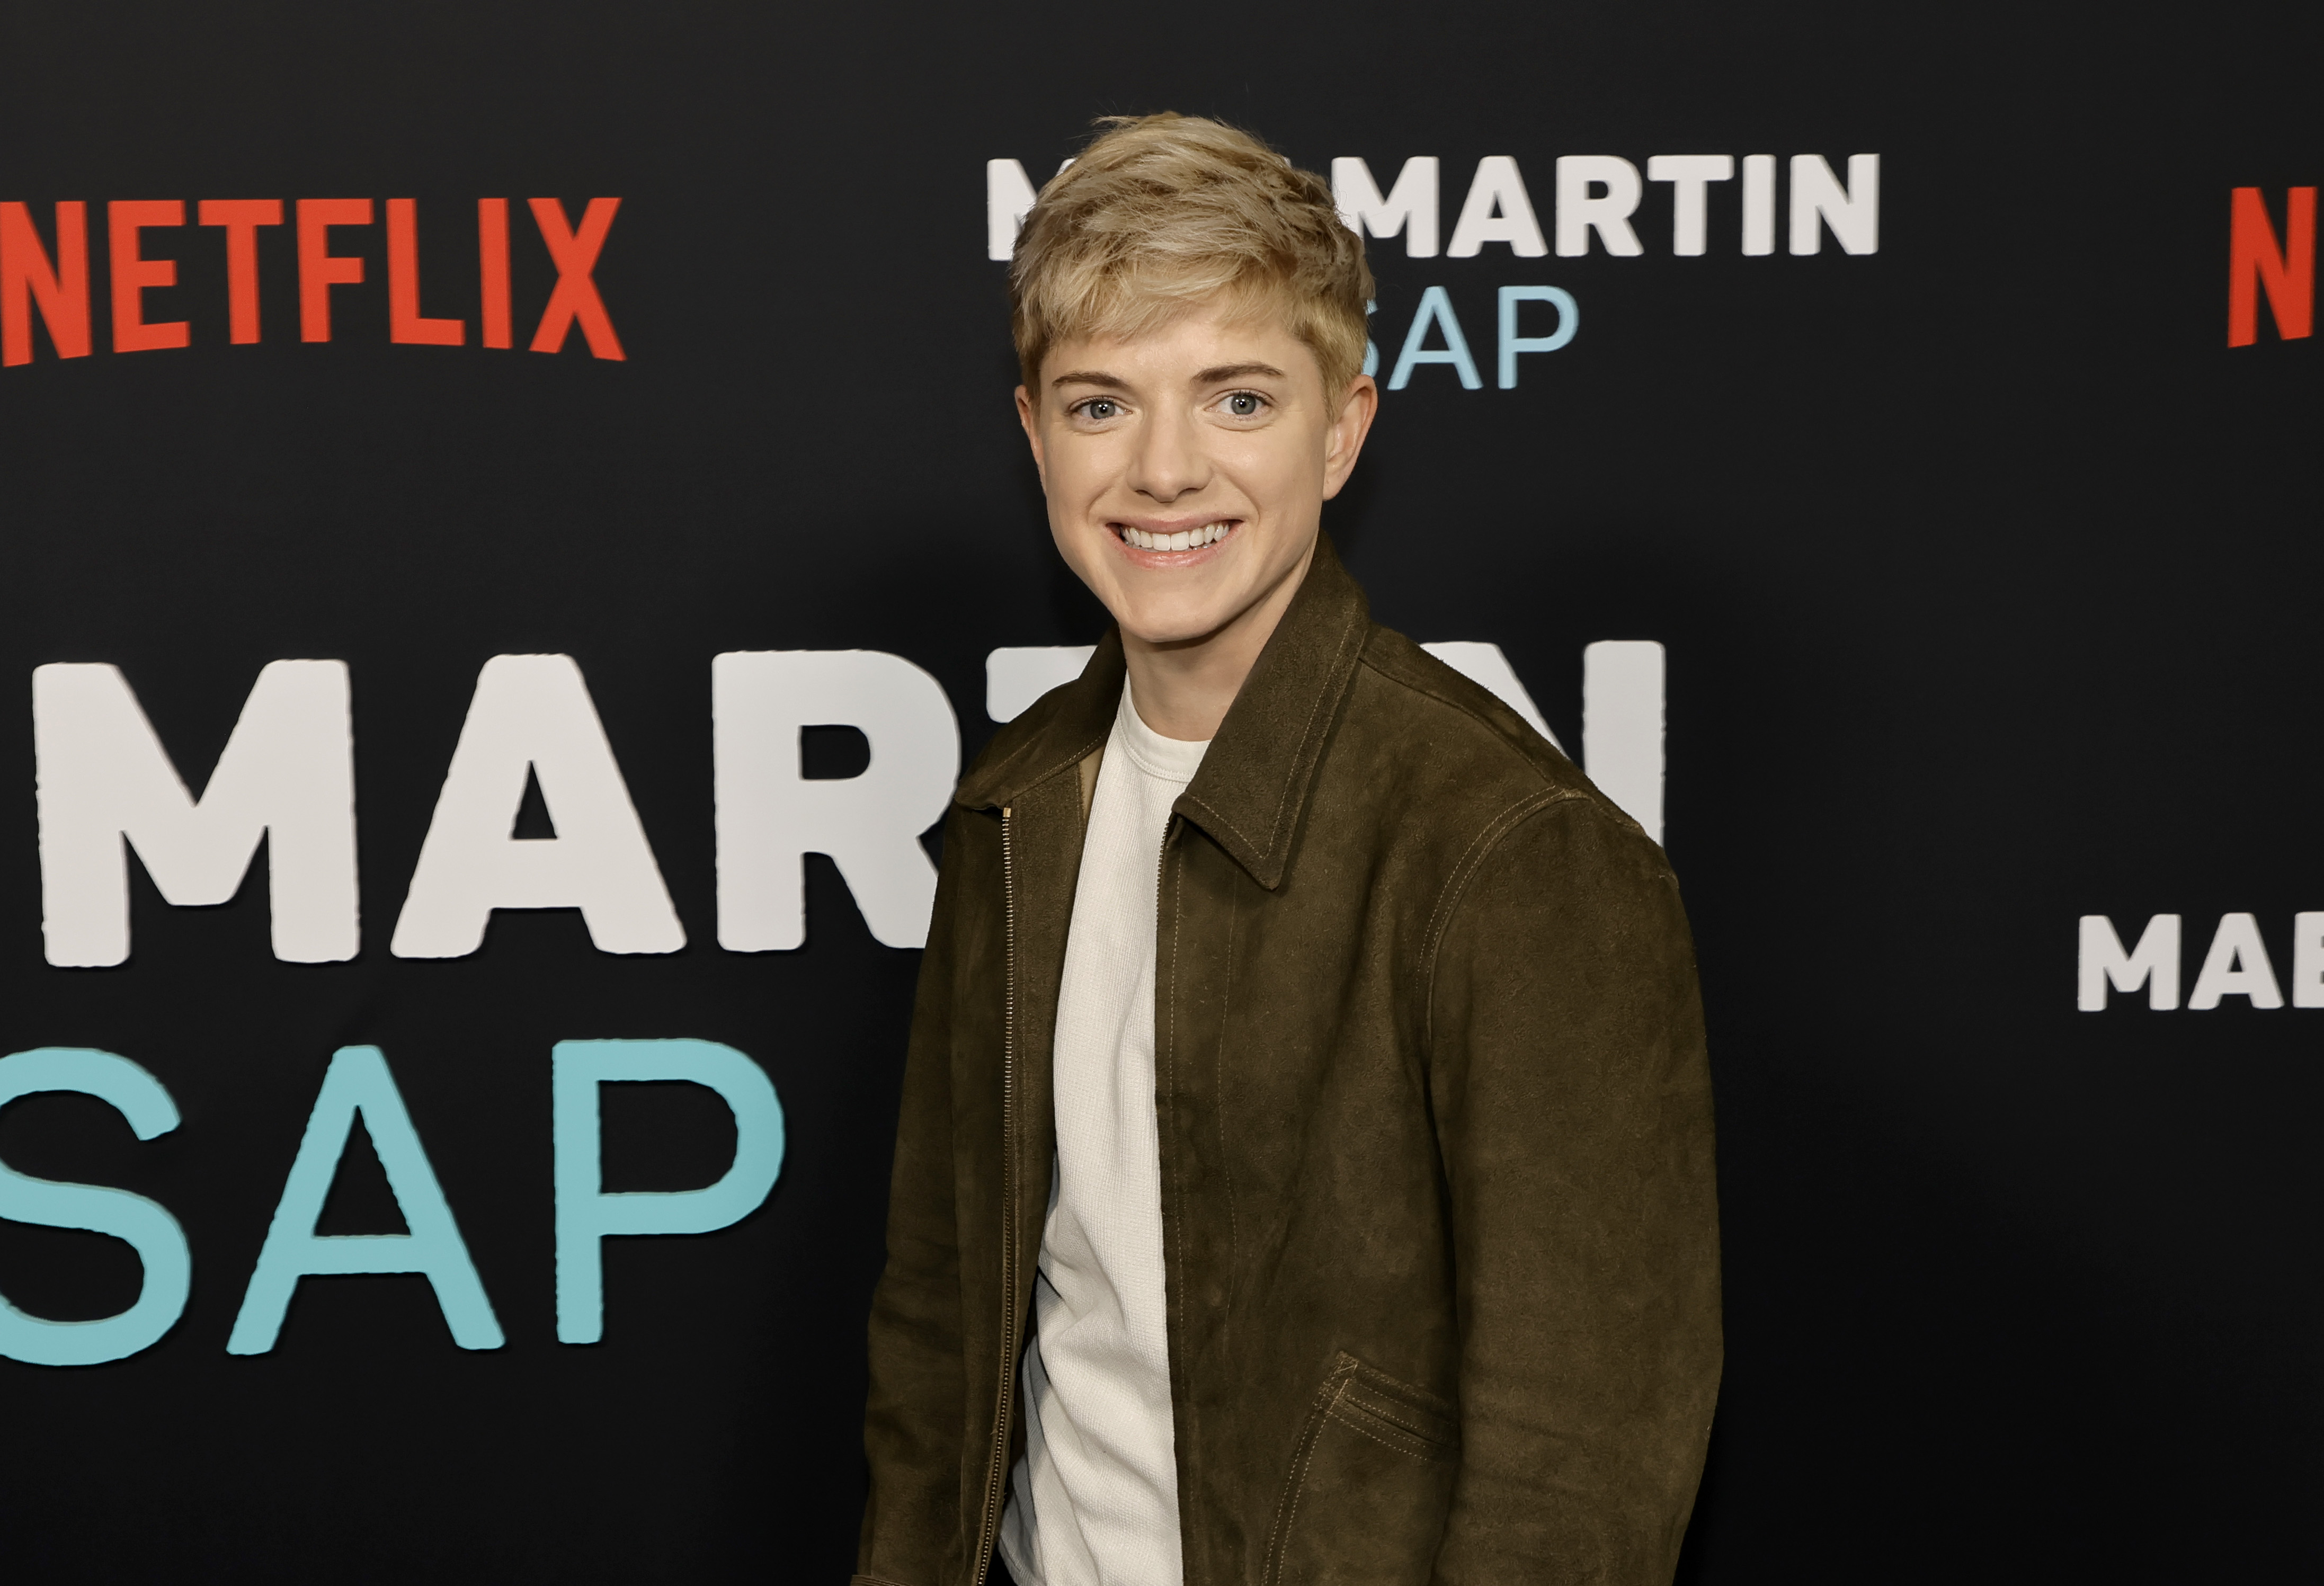 Mae Martin at the launch of Netflix's "Mae Martin: SAP" on March 28, 2023, in California | Source: Getty Images